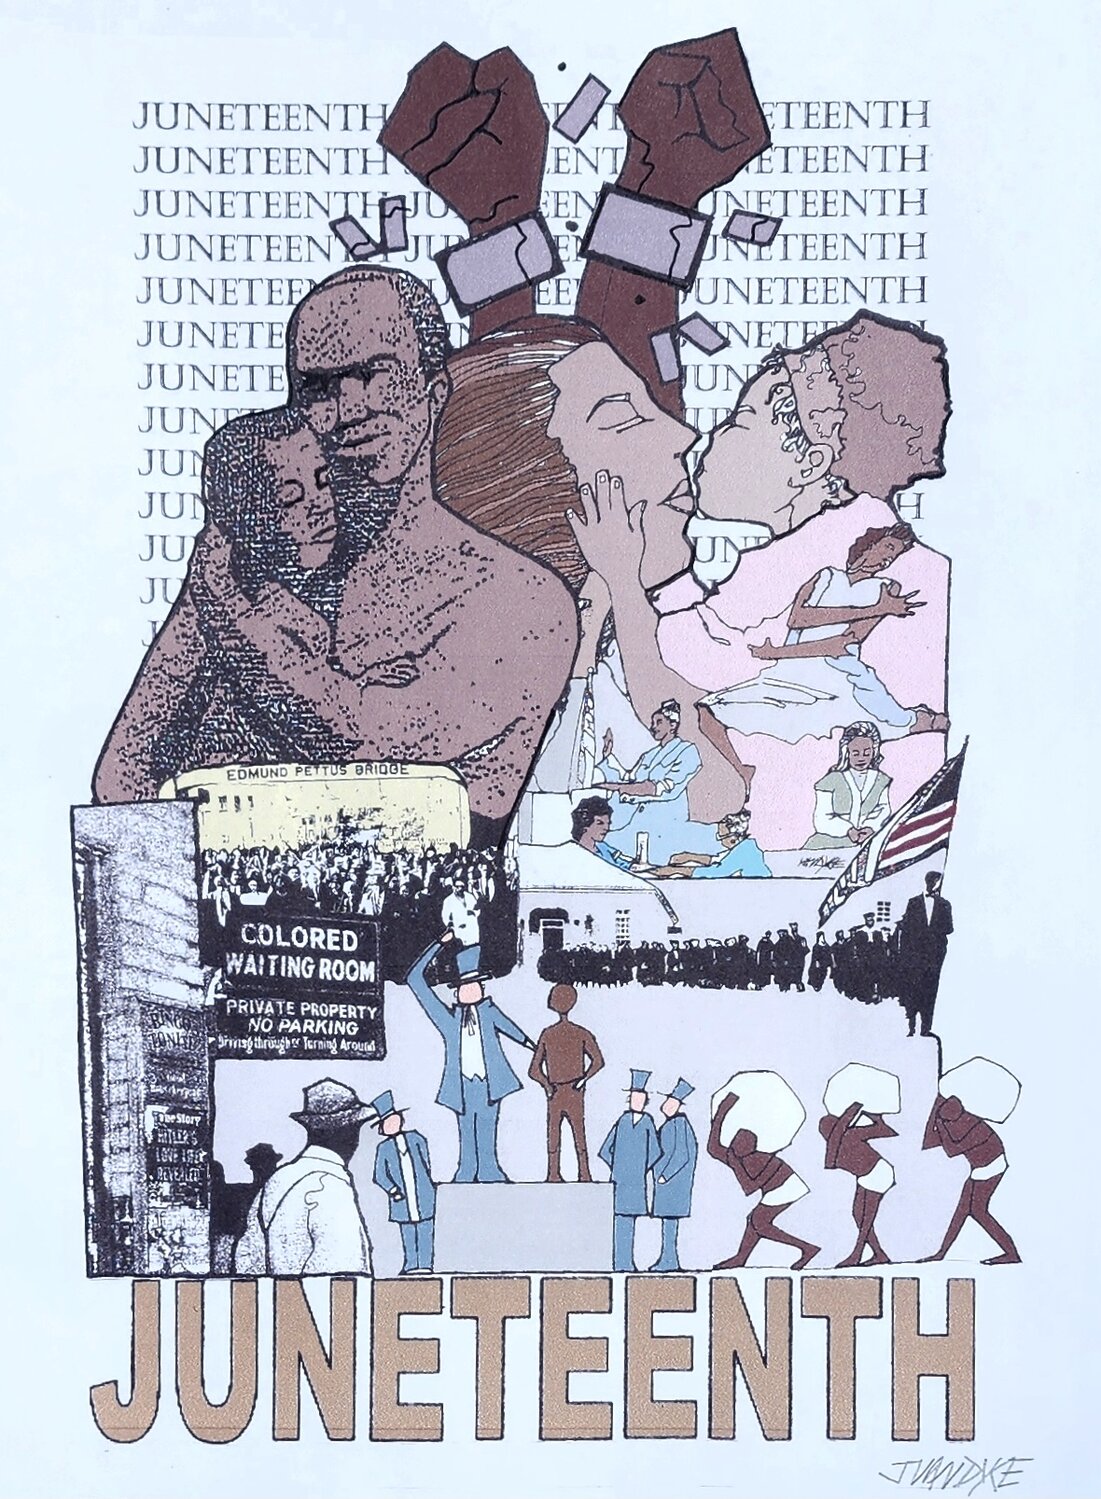 An illustration from local artist Julian Van Dyke’s 2020 book “Juneteenth, Celebrating Freedom” depicts the Black struggle for freedom in the United States.